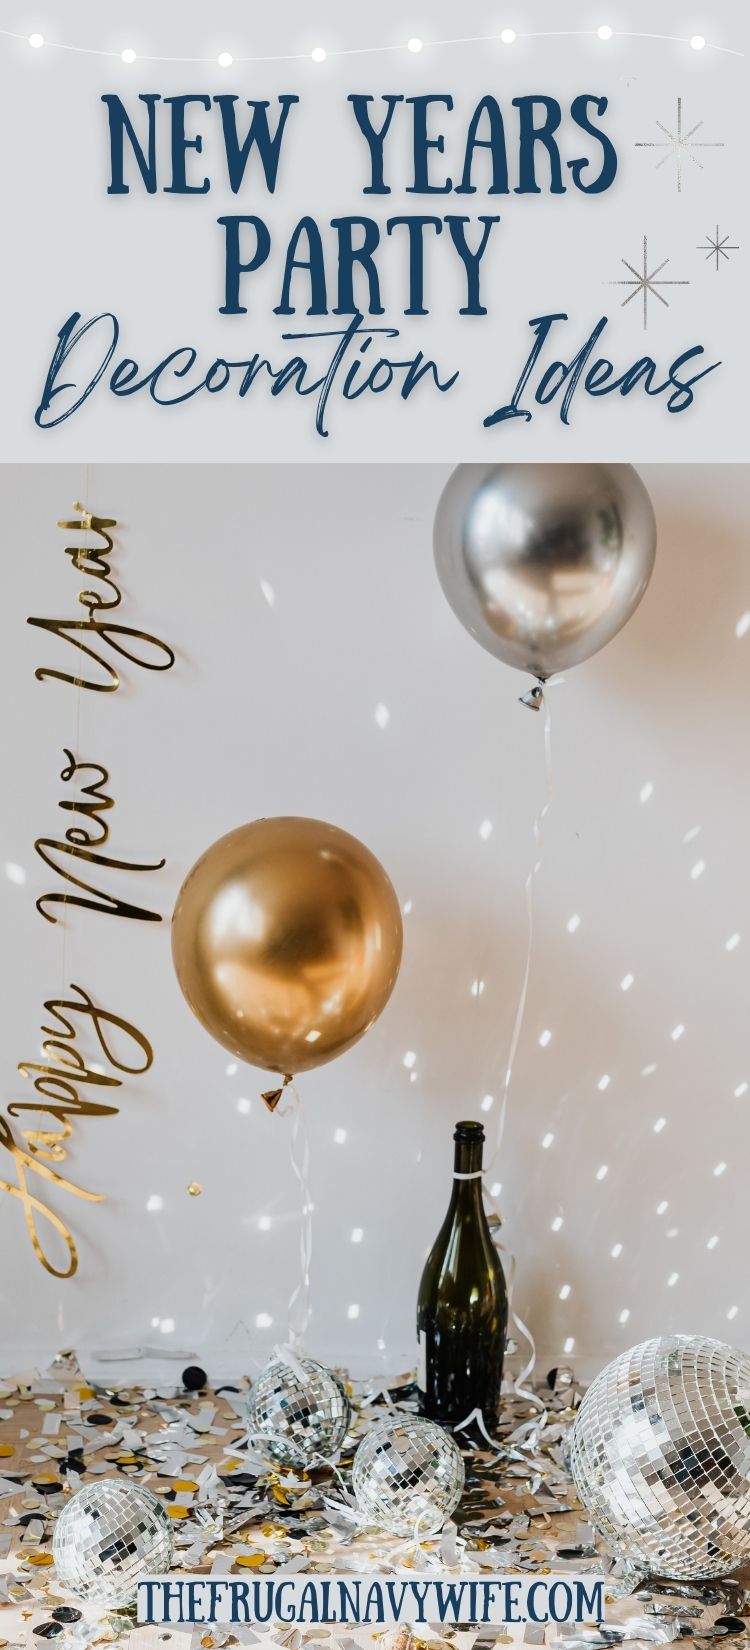 New Years Party Decoration Ideas - The Frugal Navy Wife